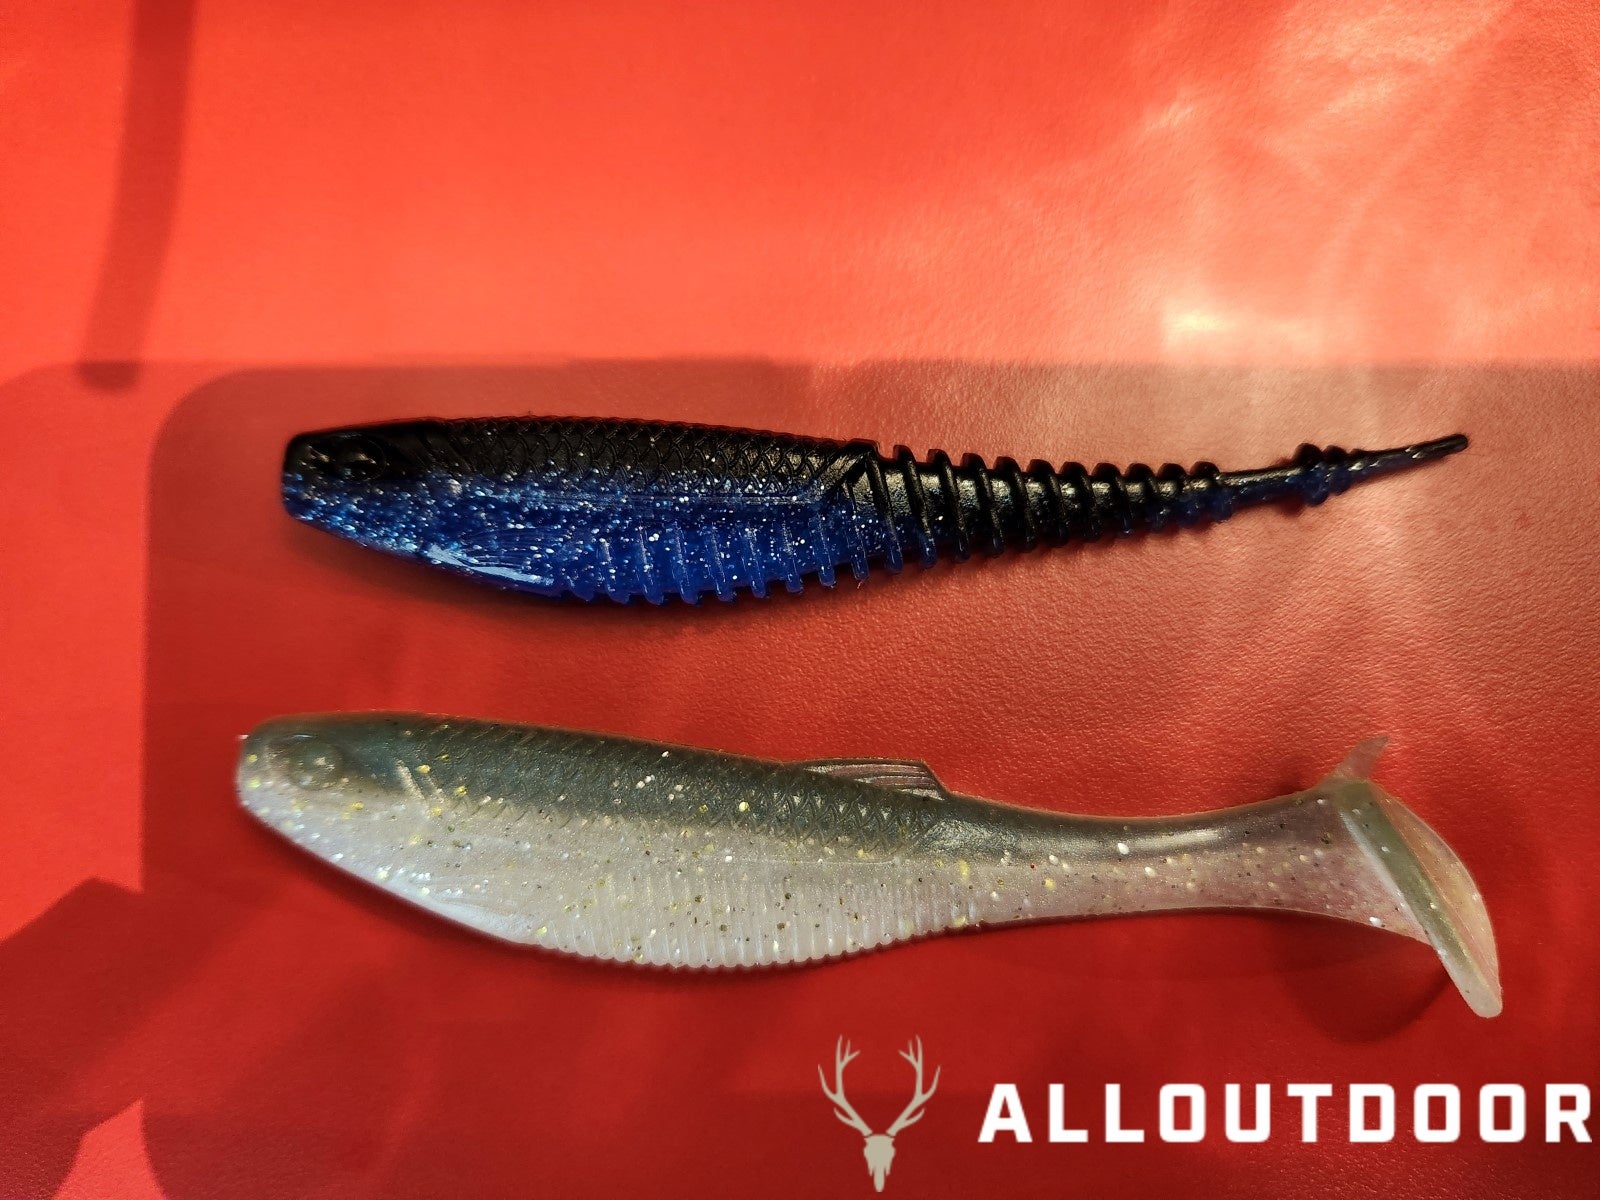 ICAST 2023] Welcome to Crush City - Rapala's Premier Line of Soft Baits